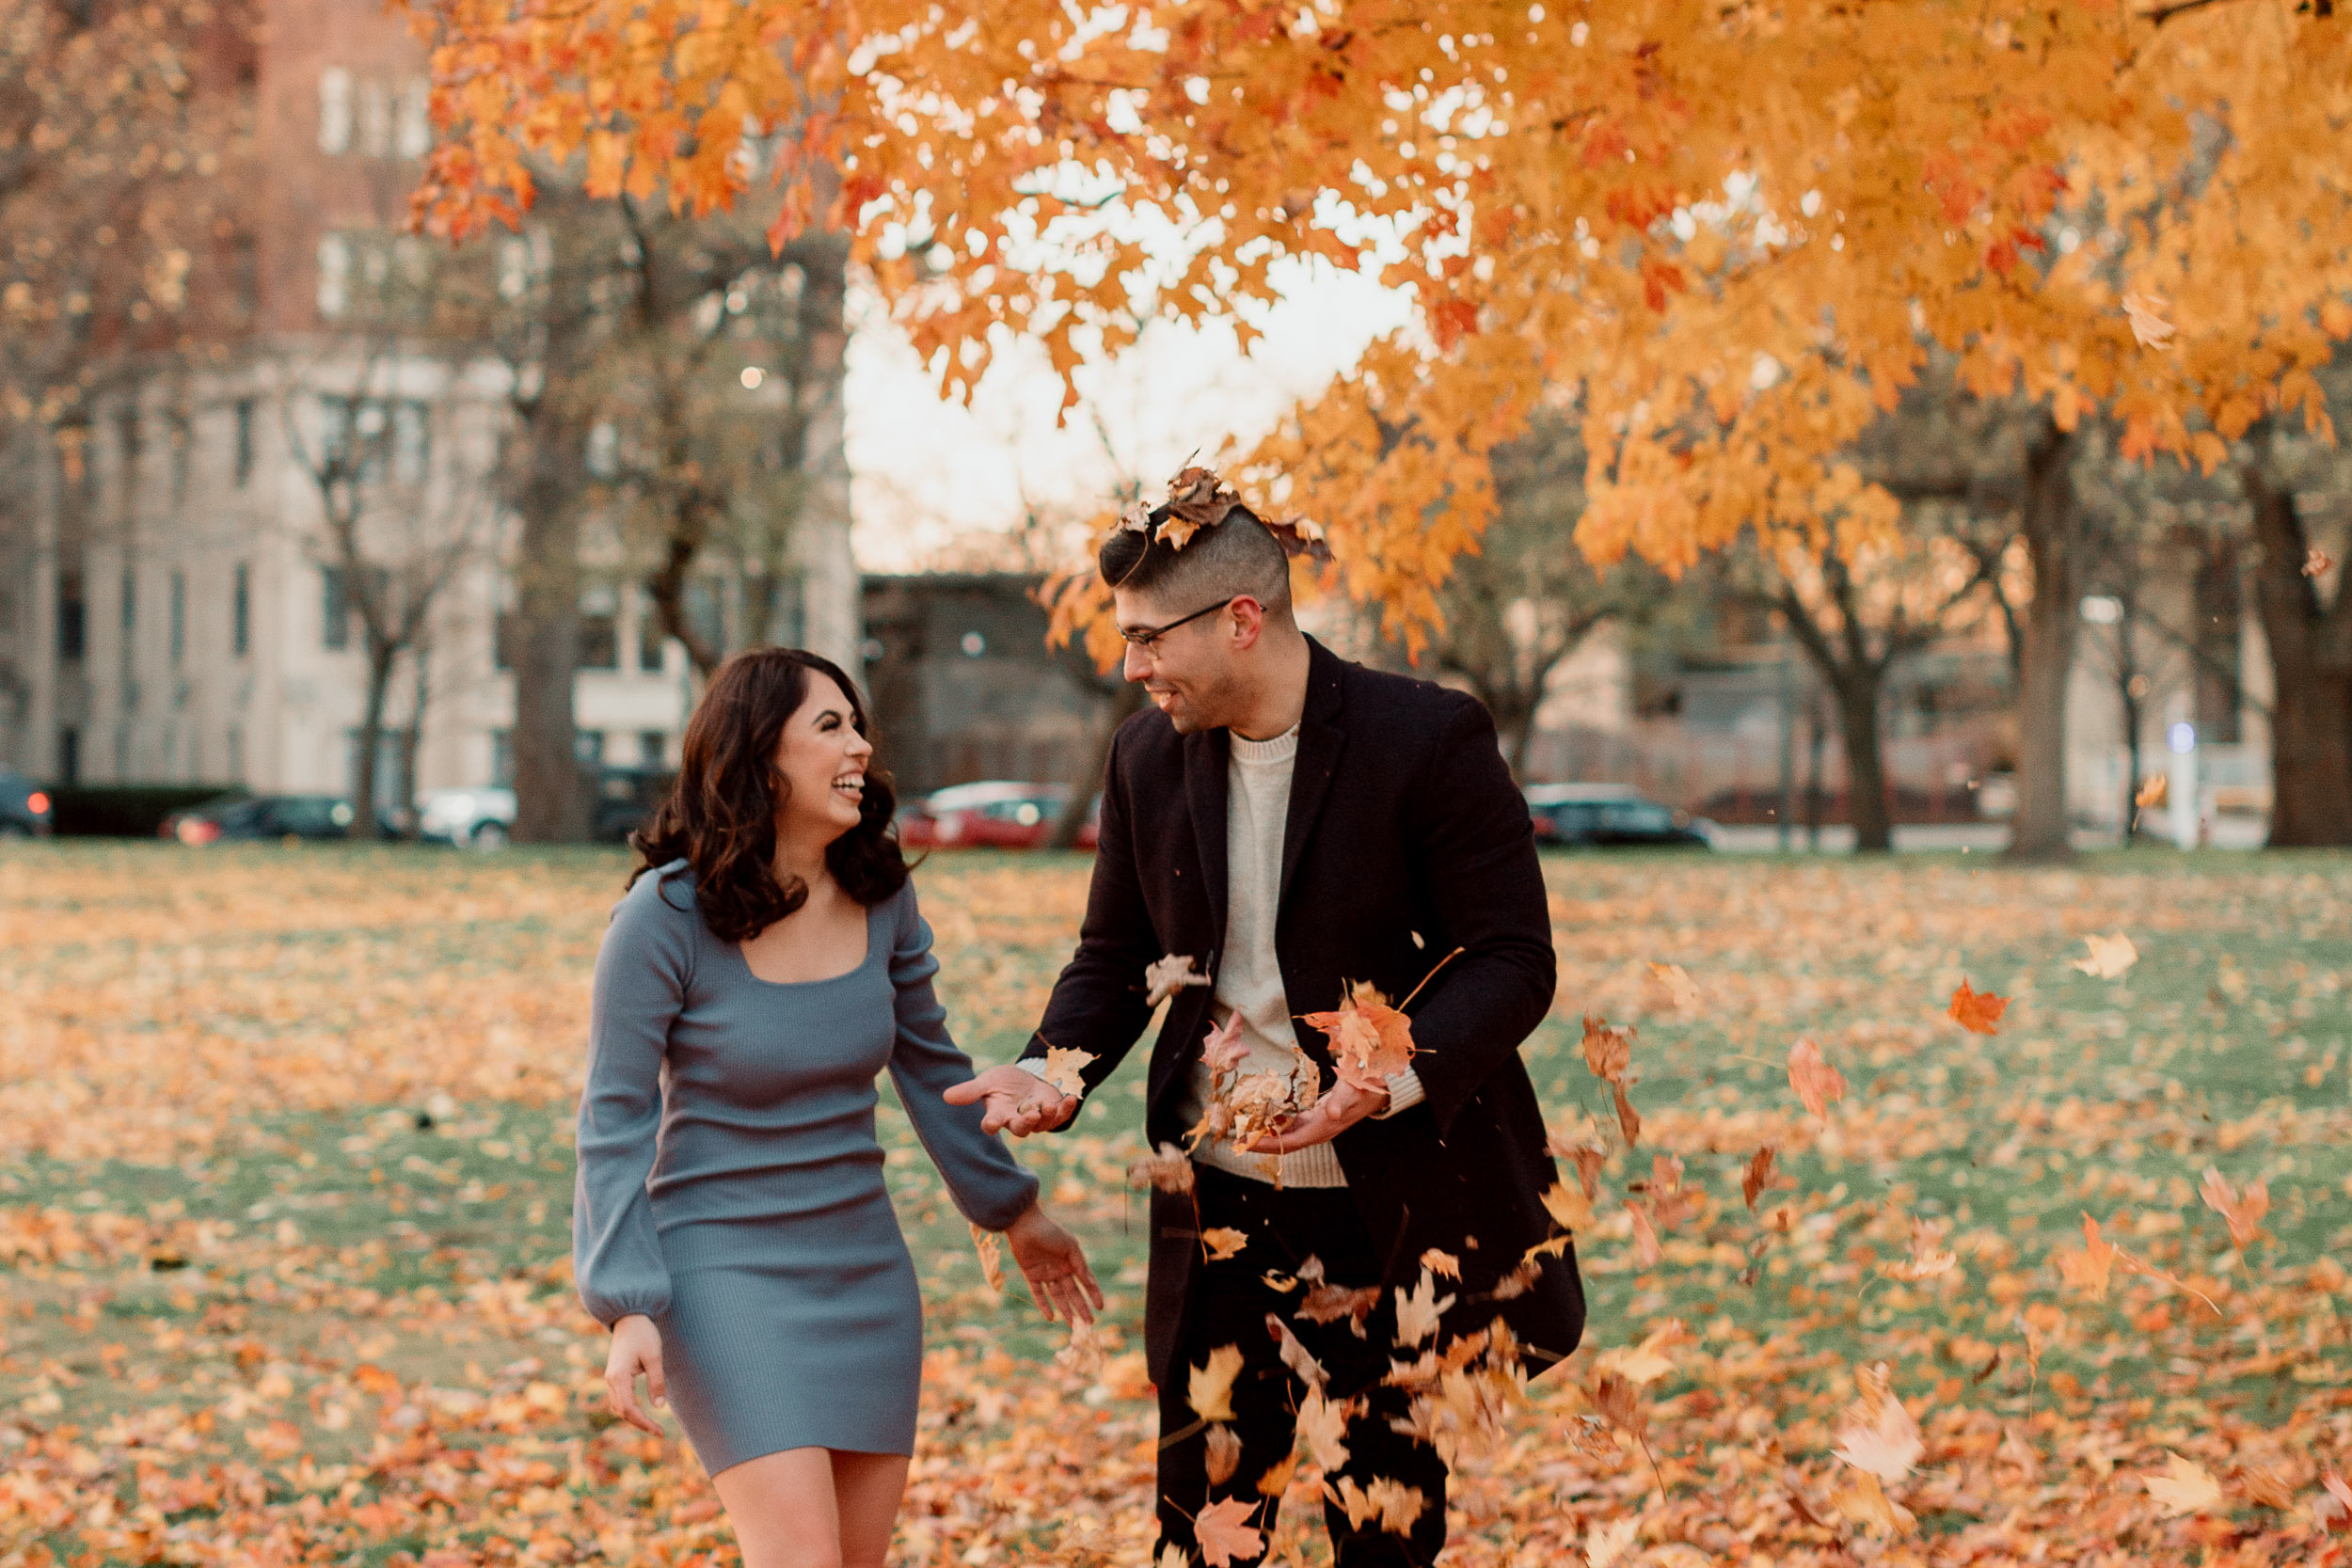 Cozy fall engagement photo ideas in the park